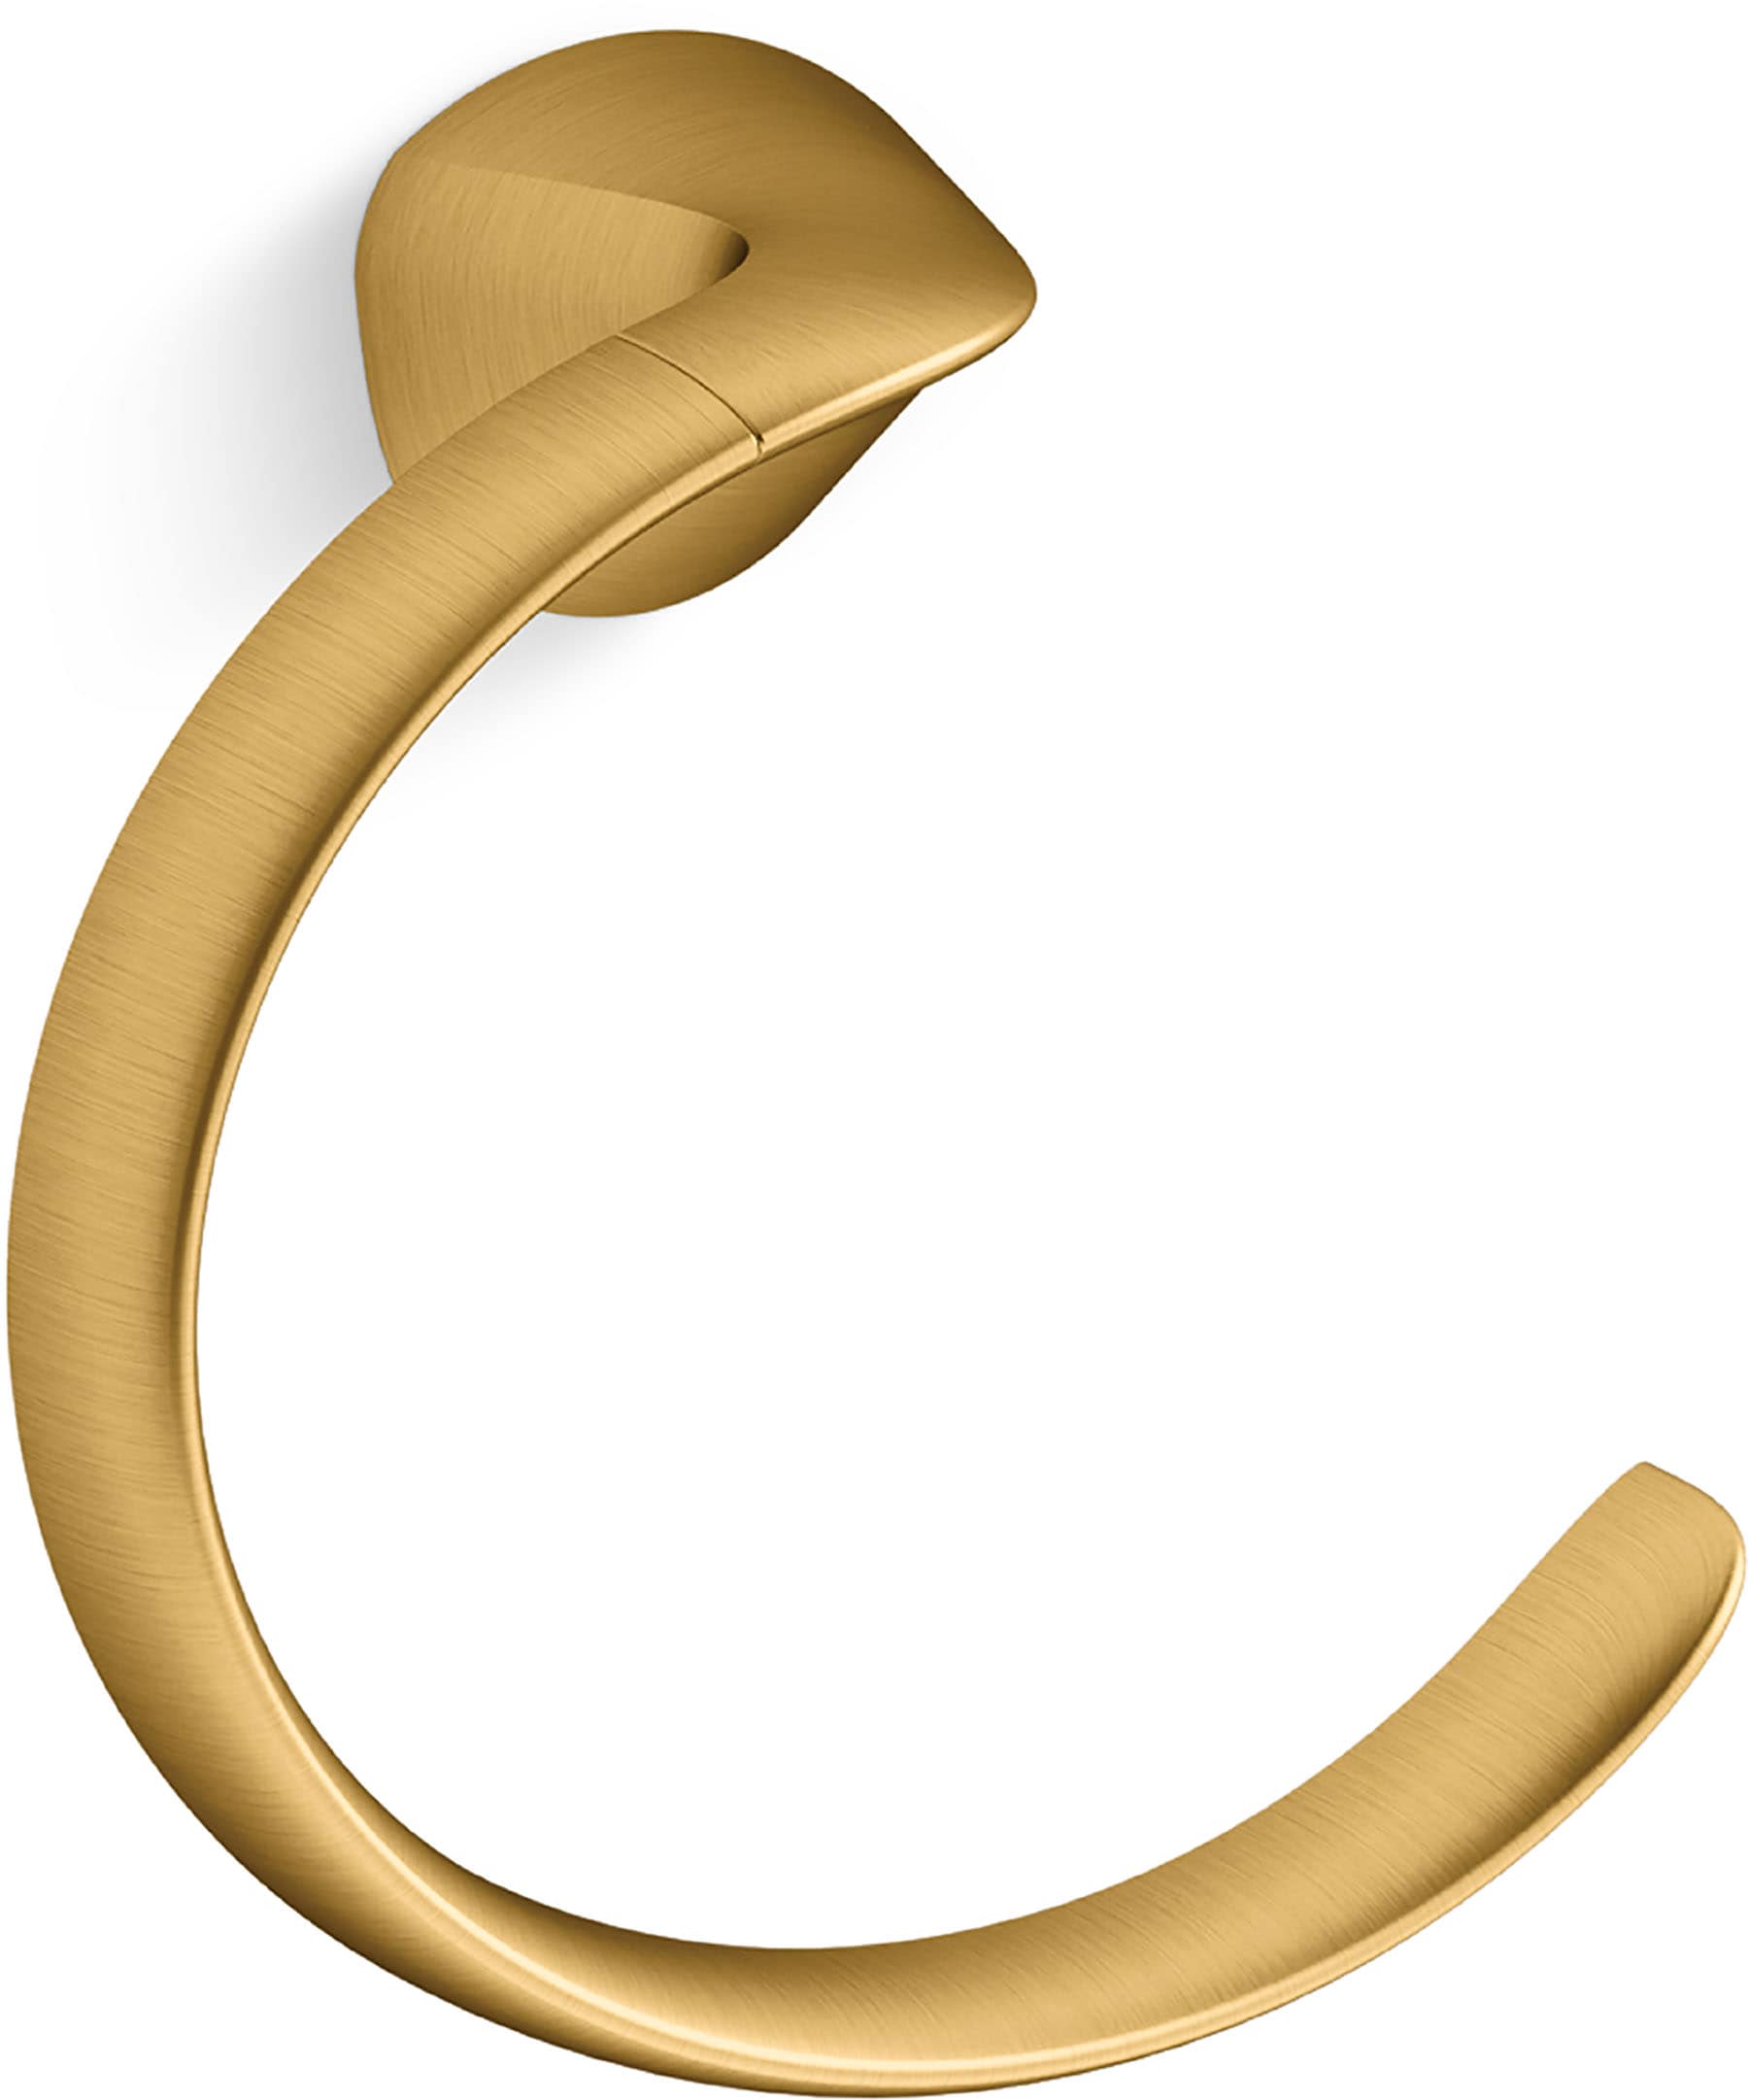 Towel Ring – Brushed Brass  Sage Accessories - Blutide - Taps